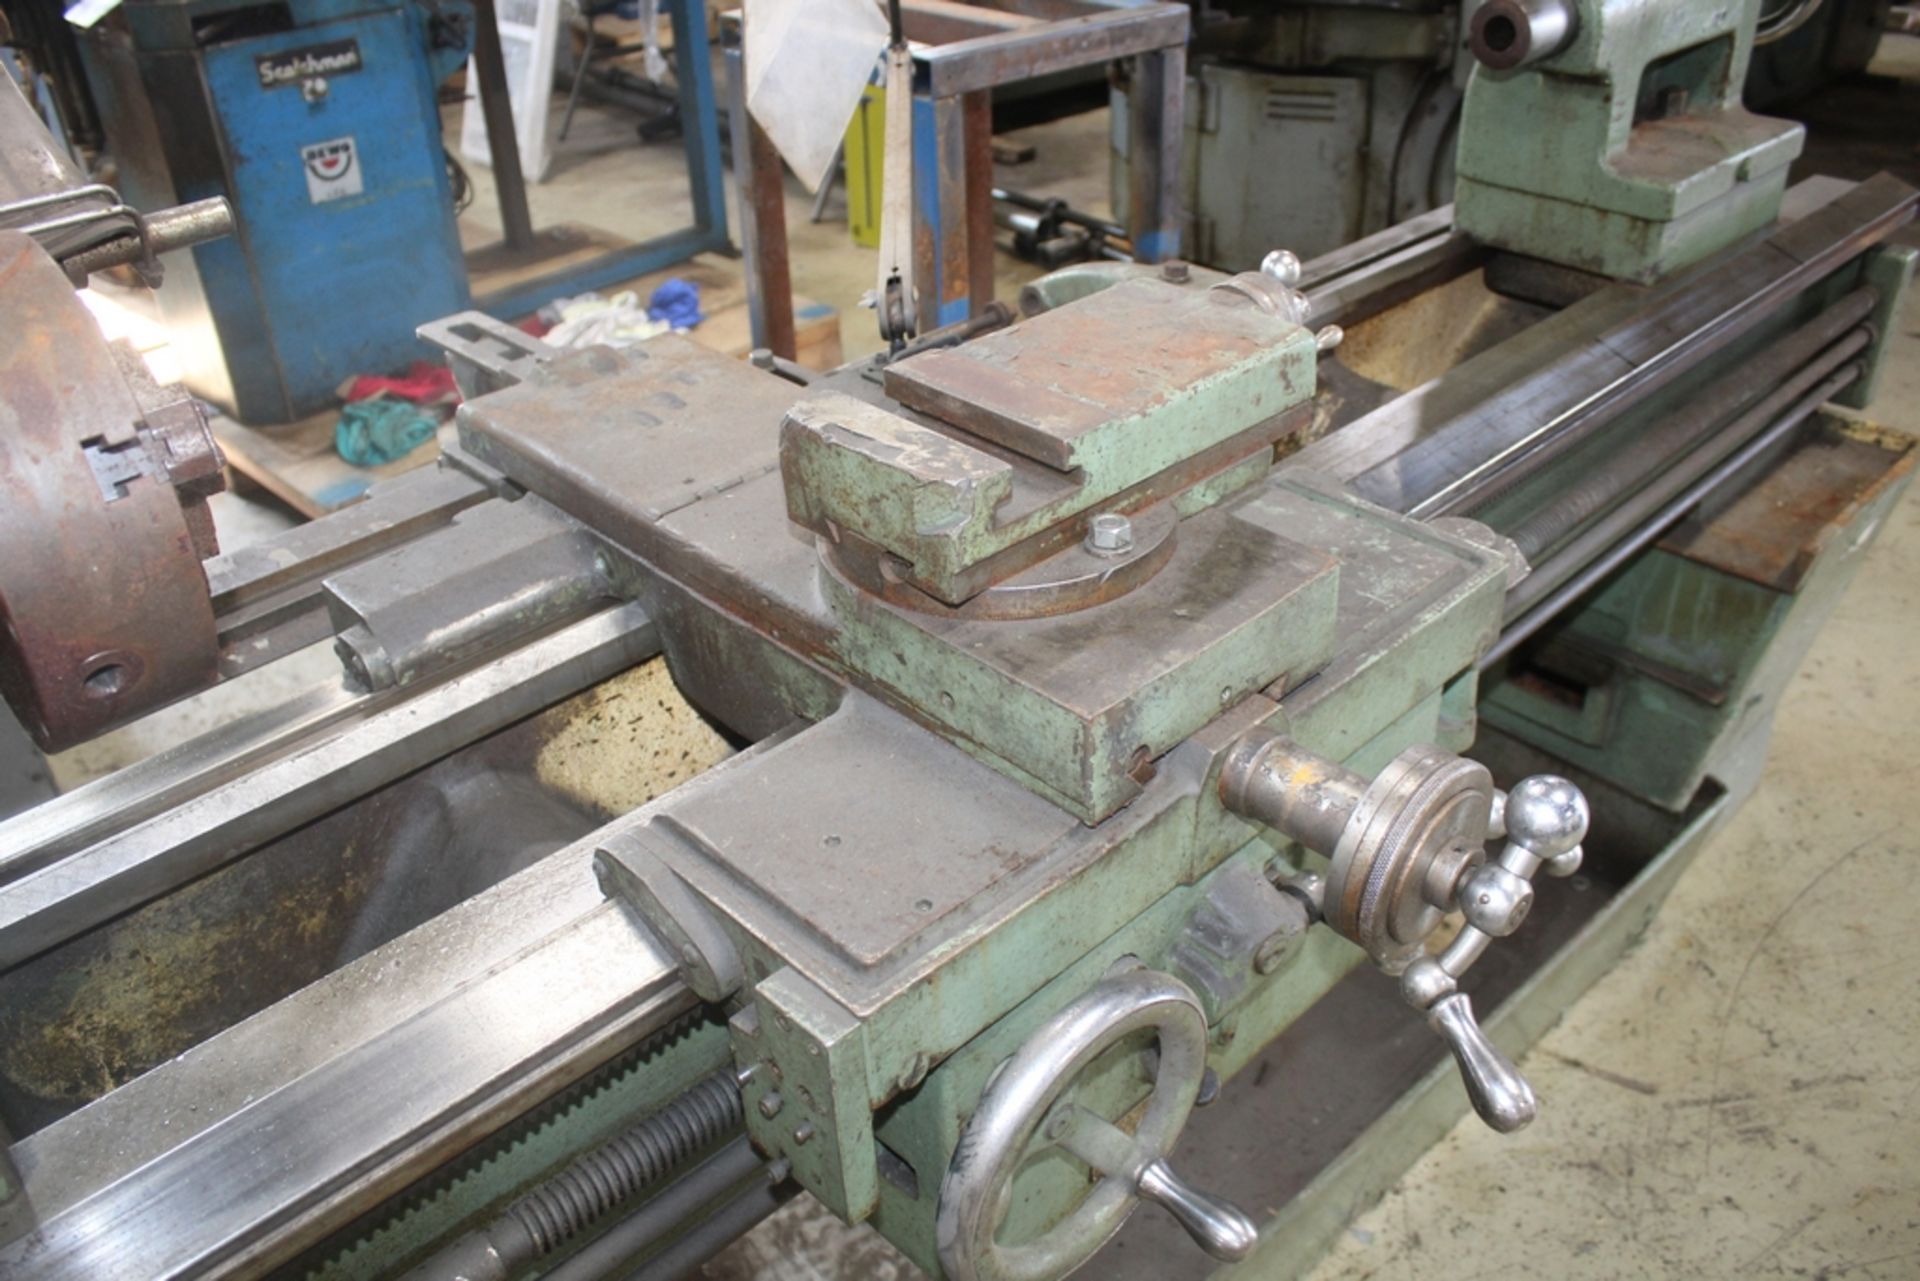 LEBLOND 19”X54” MODEL REGAL TOOLROOM LATHE, S/N 2F876, 1500 SPINDLE RPM, WITH 8” 3-JAW CHUCK, INCH - Image 4 of 6